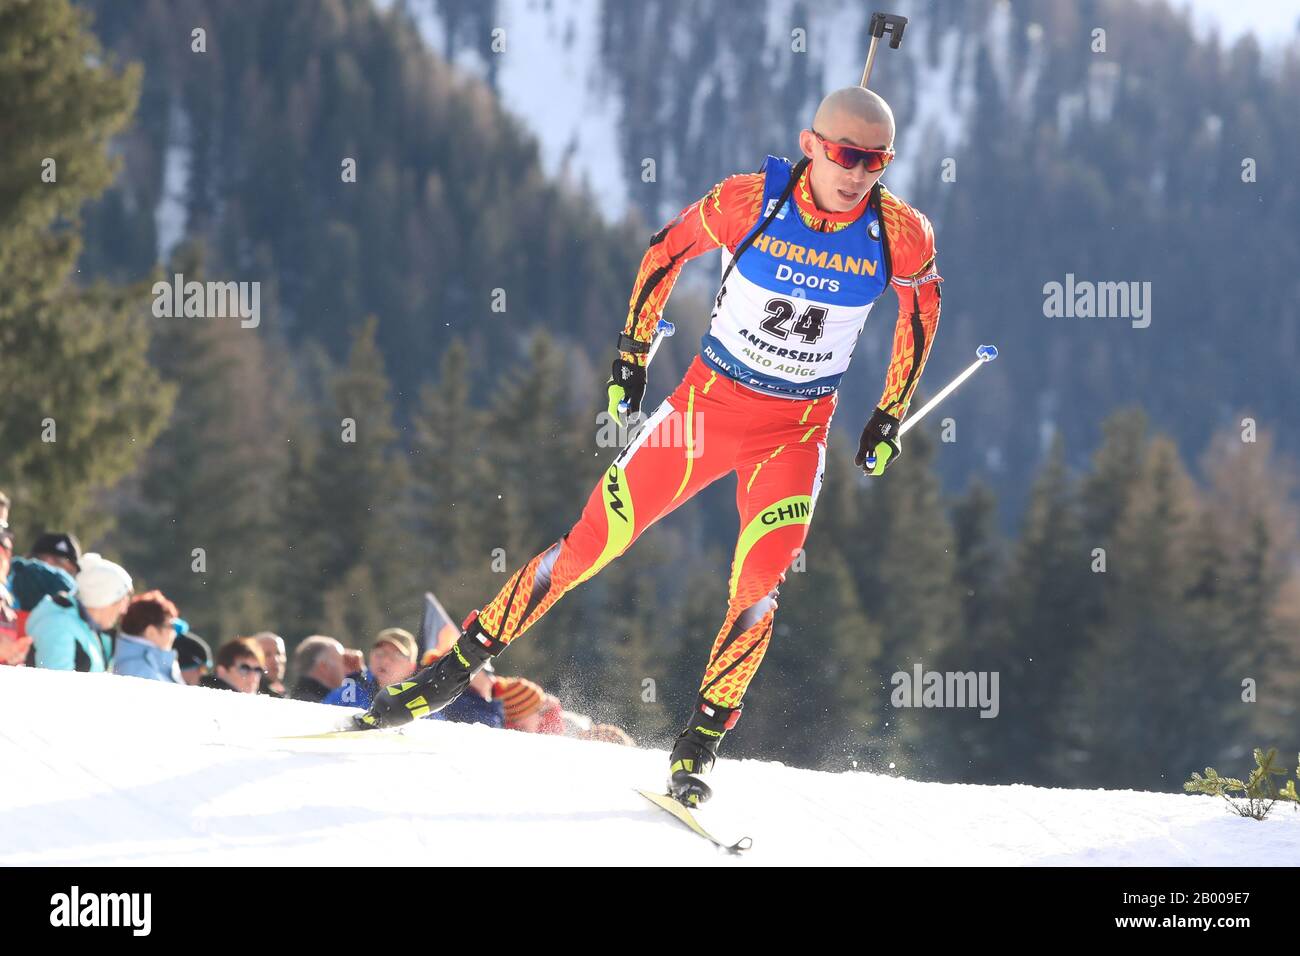 Fangming Cheng (CHN) during the 10km sprint at the IBU Biathlon World Championships, Saturday, Feb. 15, 2020, at Anterselva Antholz, Italy. (Pierre Teyssot/Image of Sport) Photo via Credit: Newscom/Alamy Live News Stock Photo